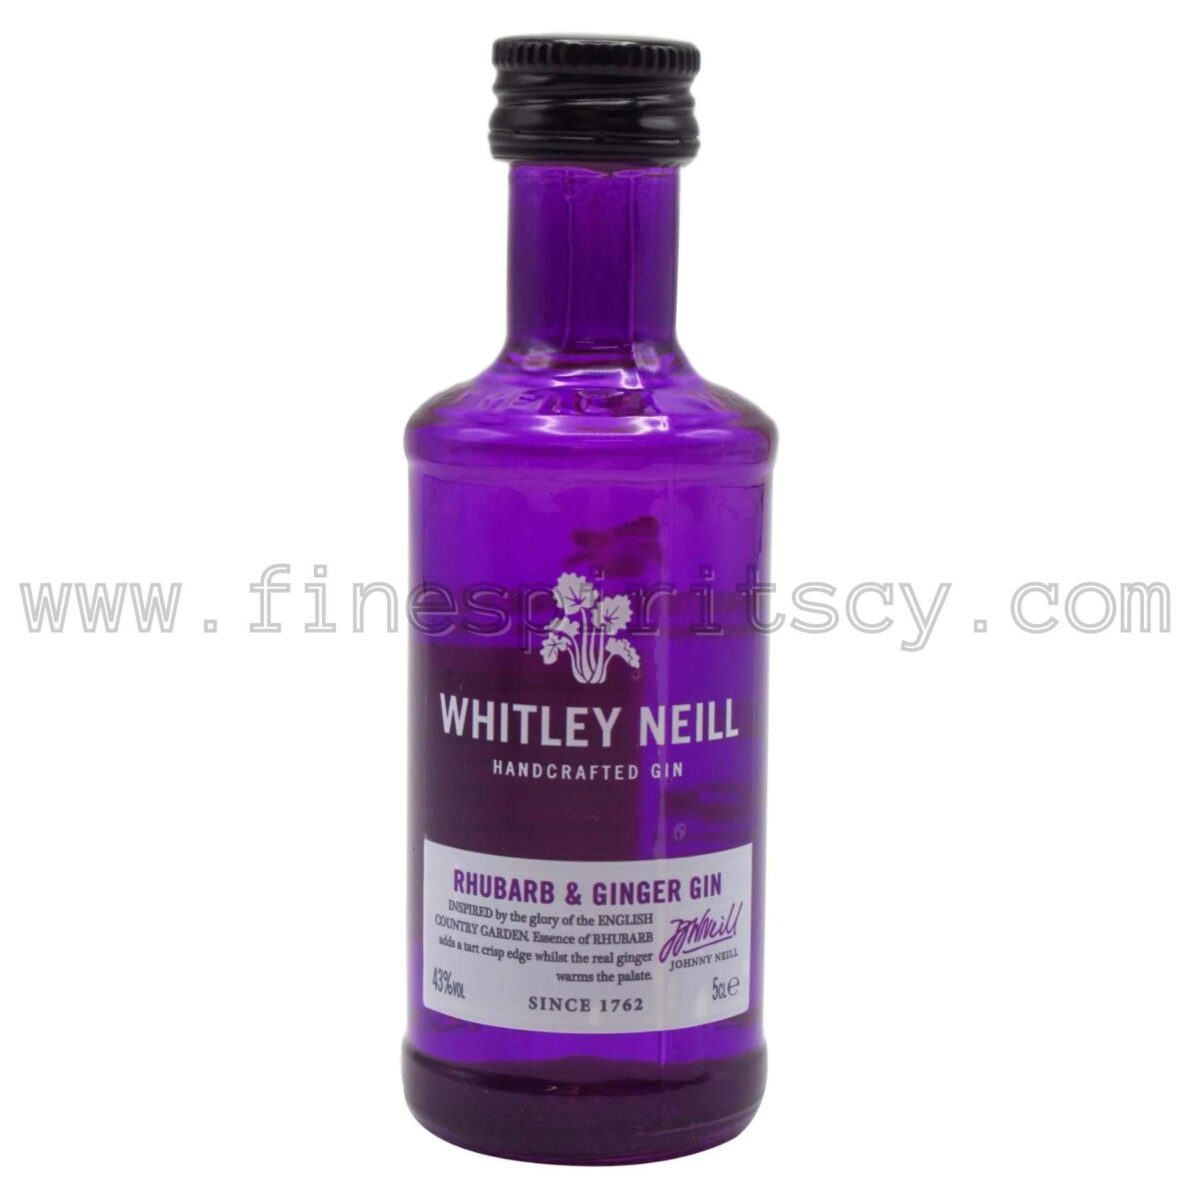 Whitley Neill Rhubarb & Ginger Gin Mini Miniature Price 50ml 5cl Cyprus